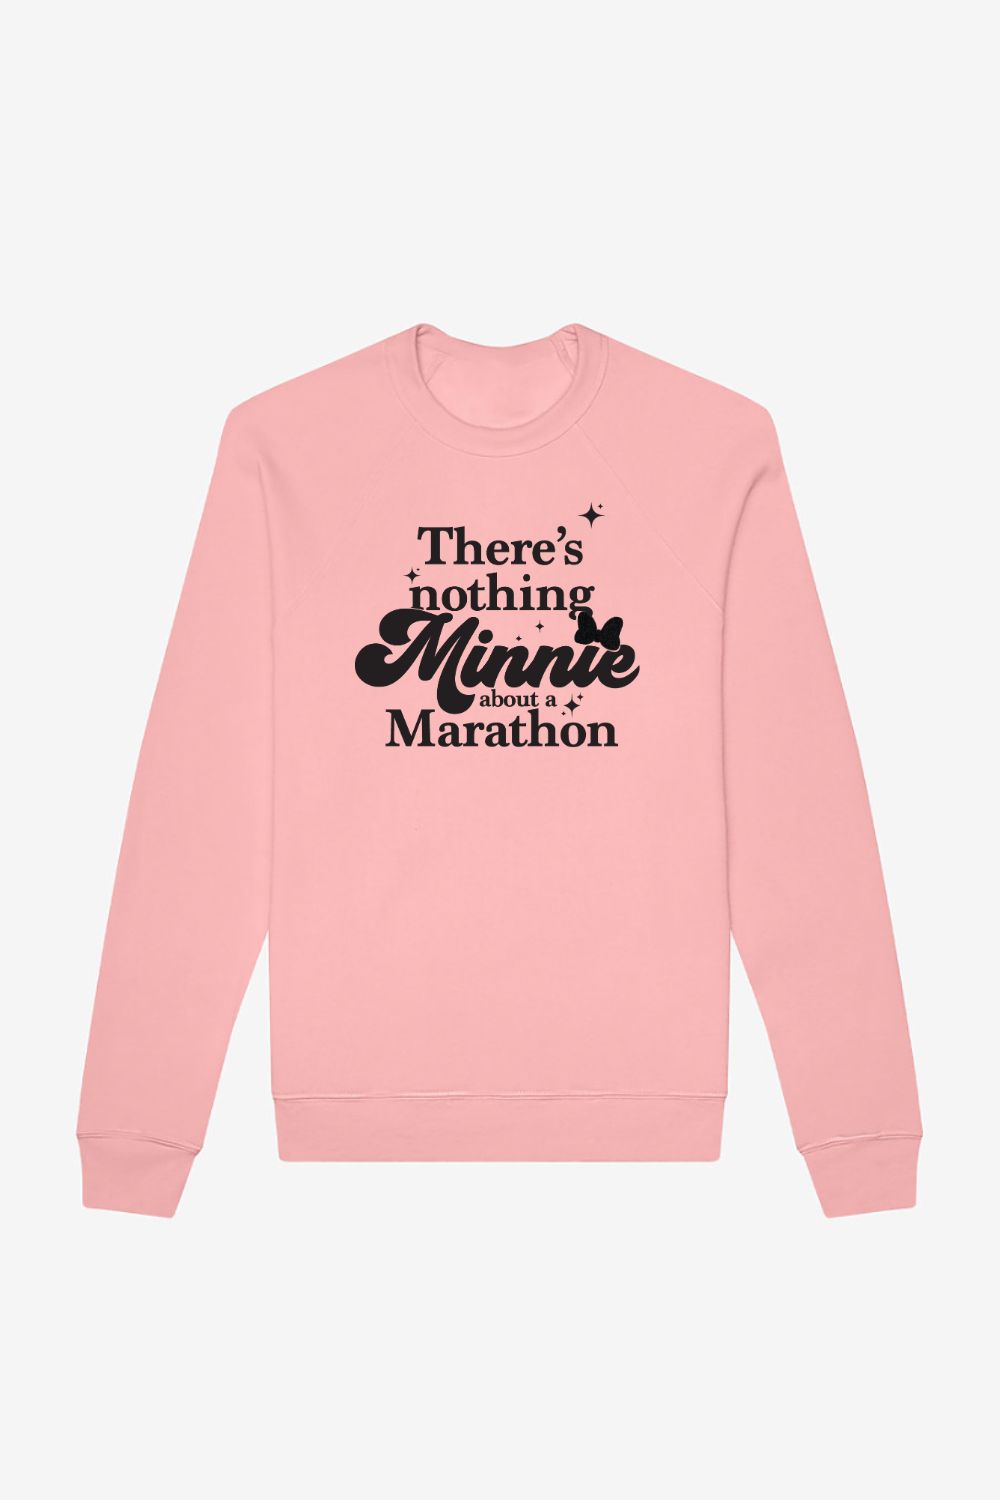 There's Nothing Minnie About a Marathon Sweatshirt